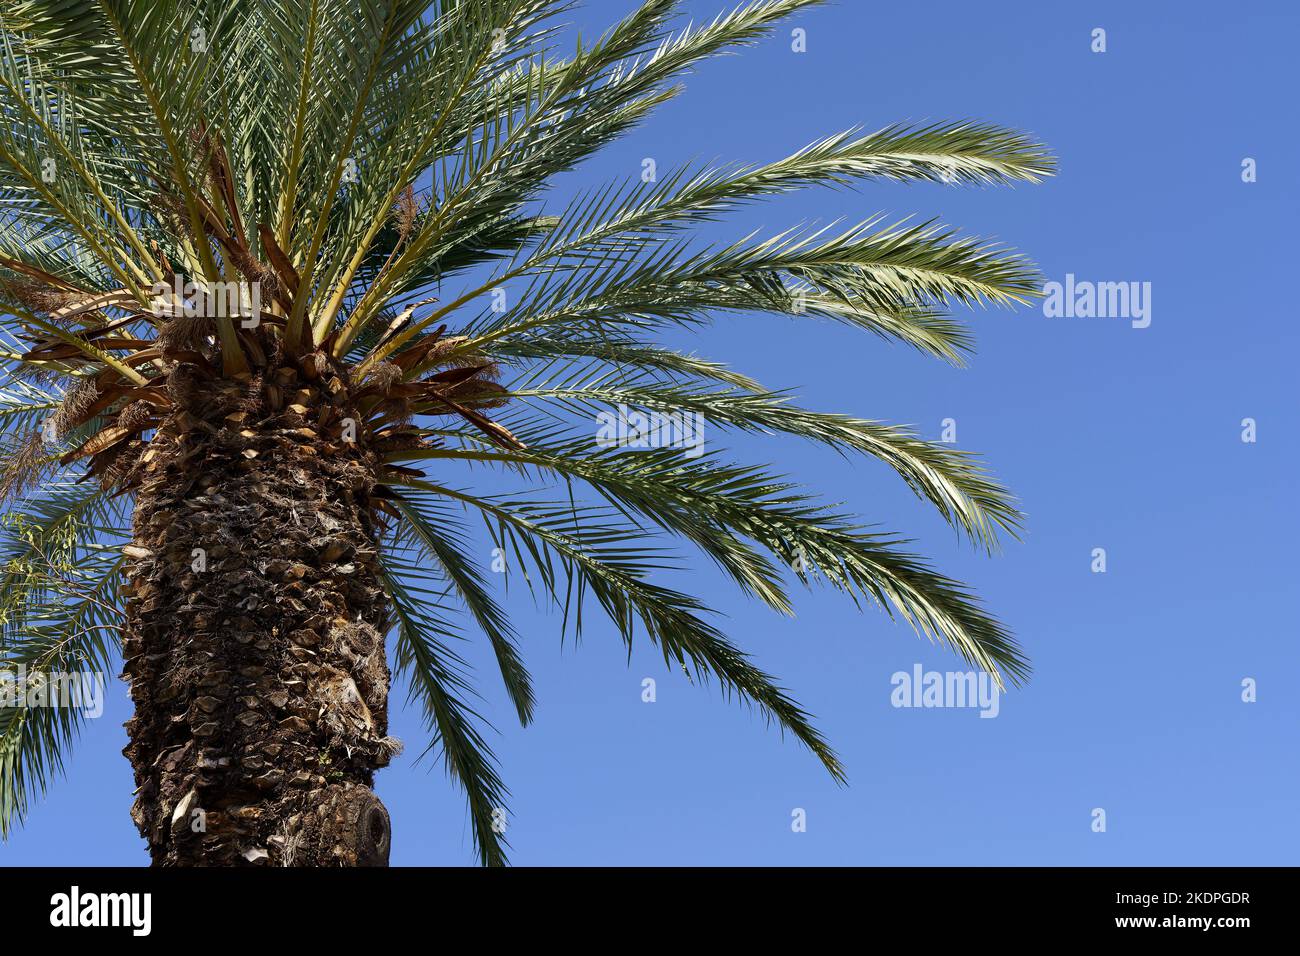 Tropical palm tree with green palm branches against a clear blue sky. Summer, vacation, relaxation, sun concept. High quality photo Stock Photo